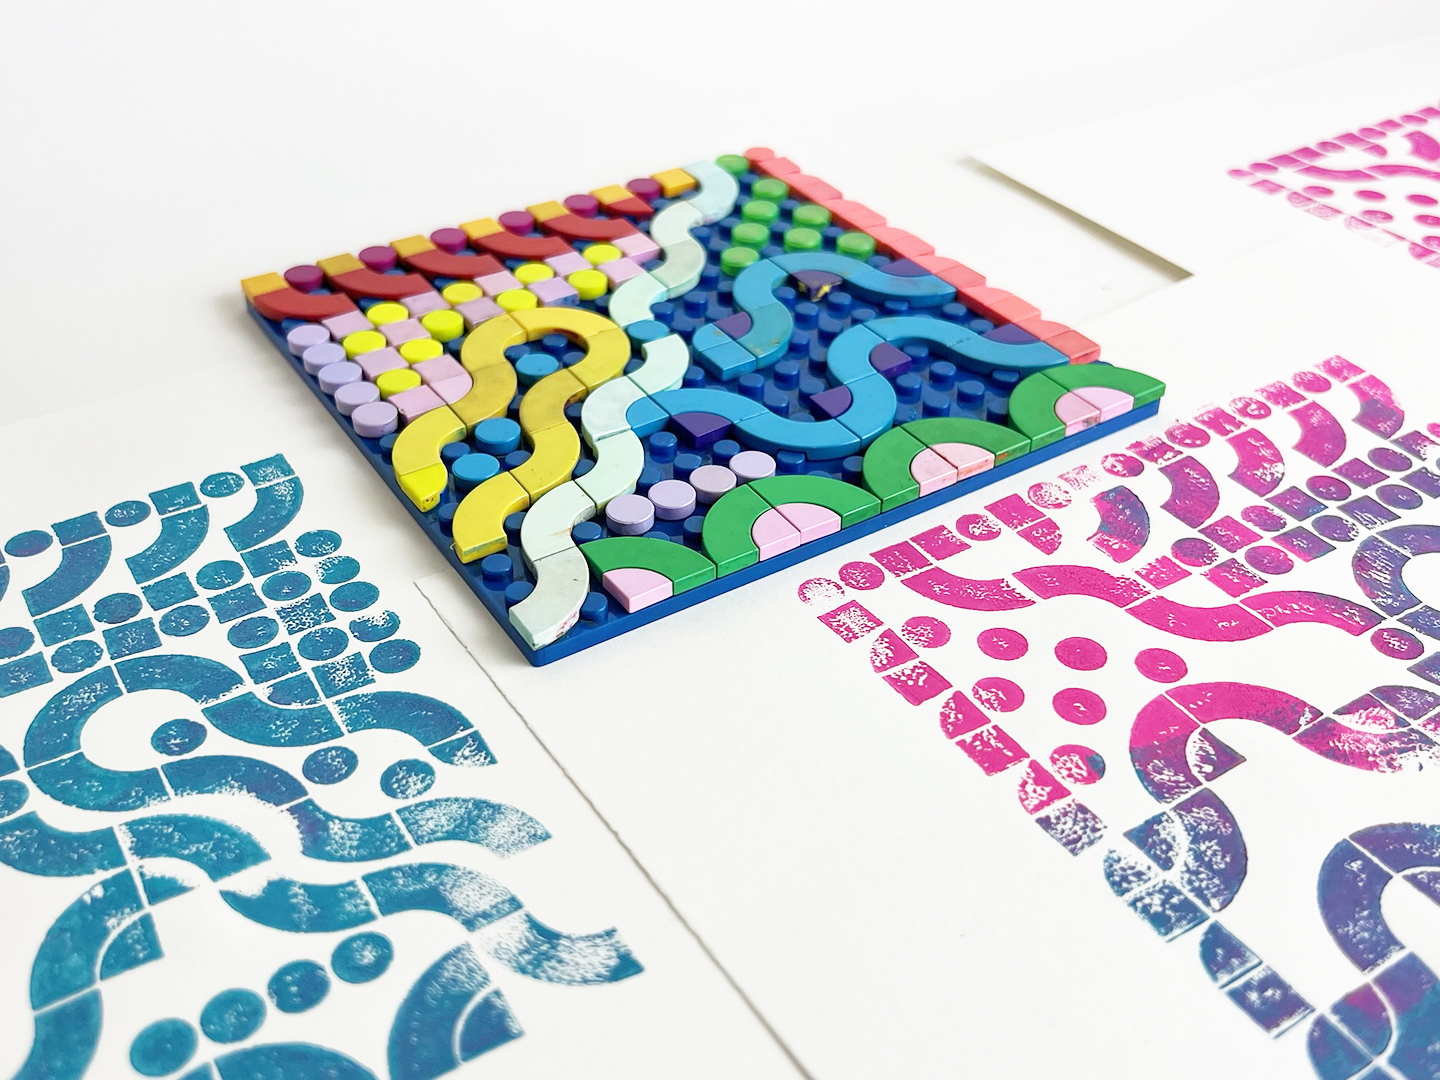 Photo of a few colorful handmade prints and a lego block stencil laying on a white surface.